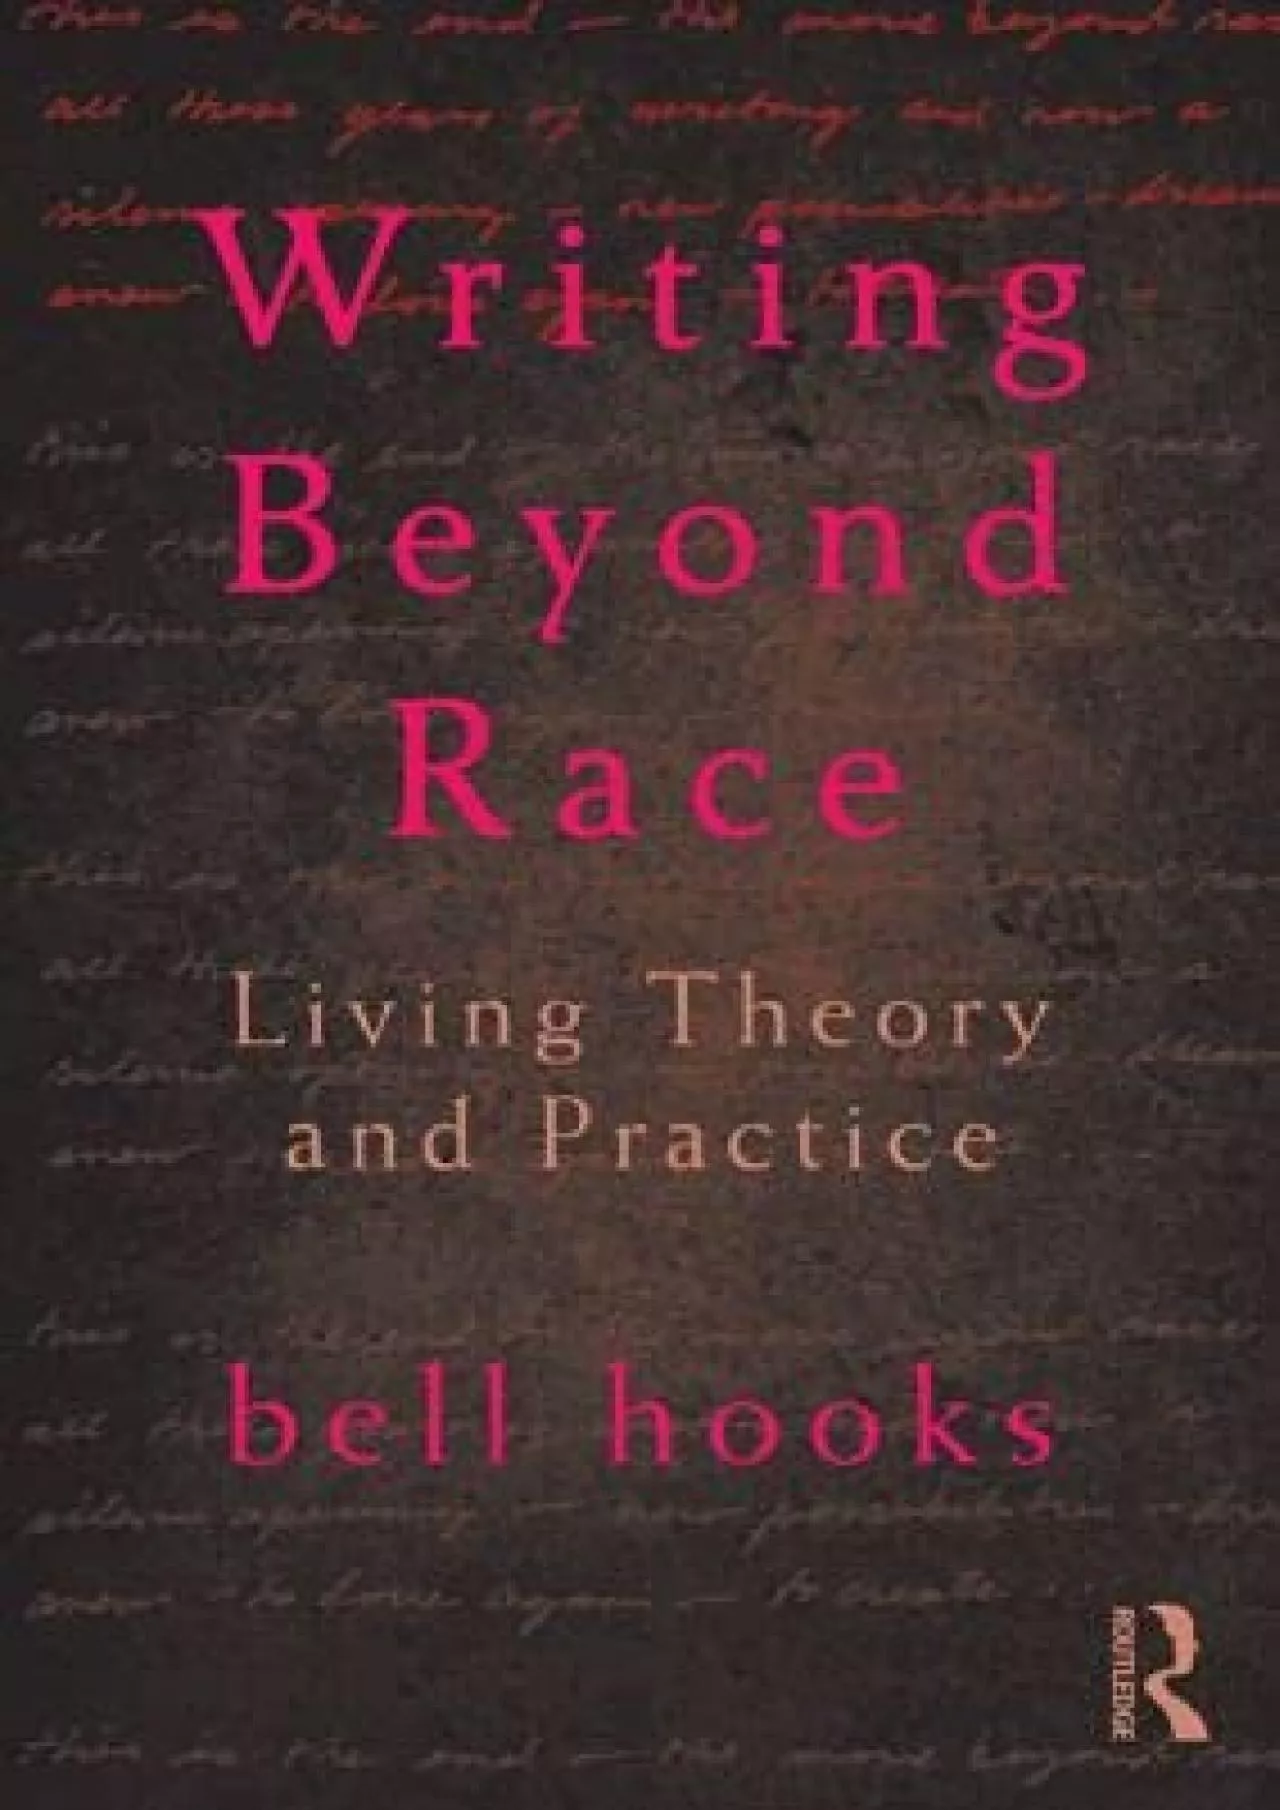 (EBOOK)-Writing Beyond Race: Living Theory and Practice